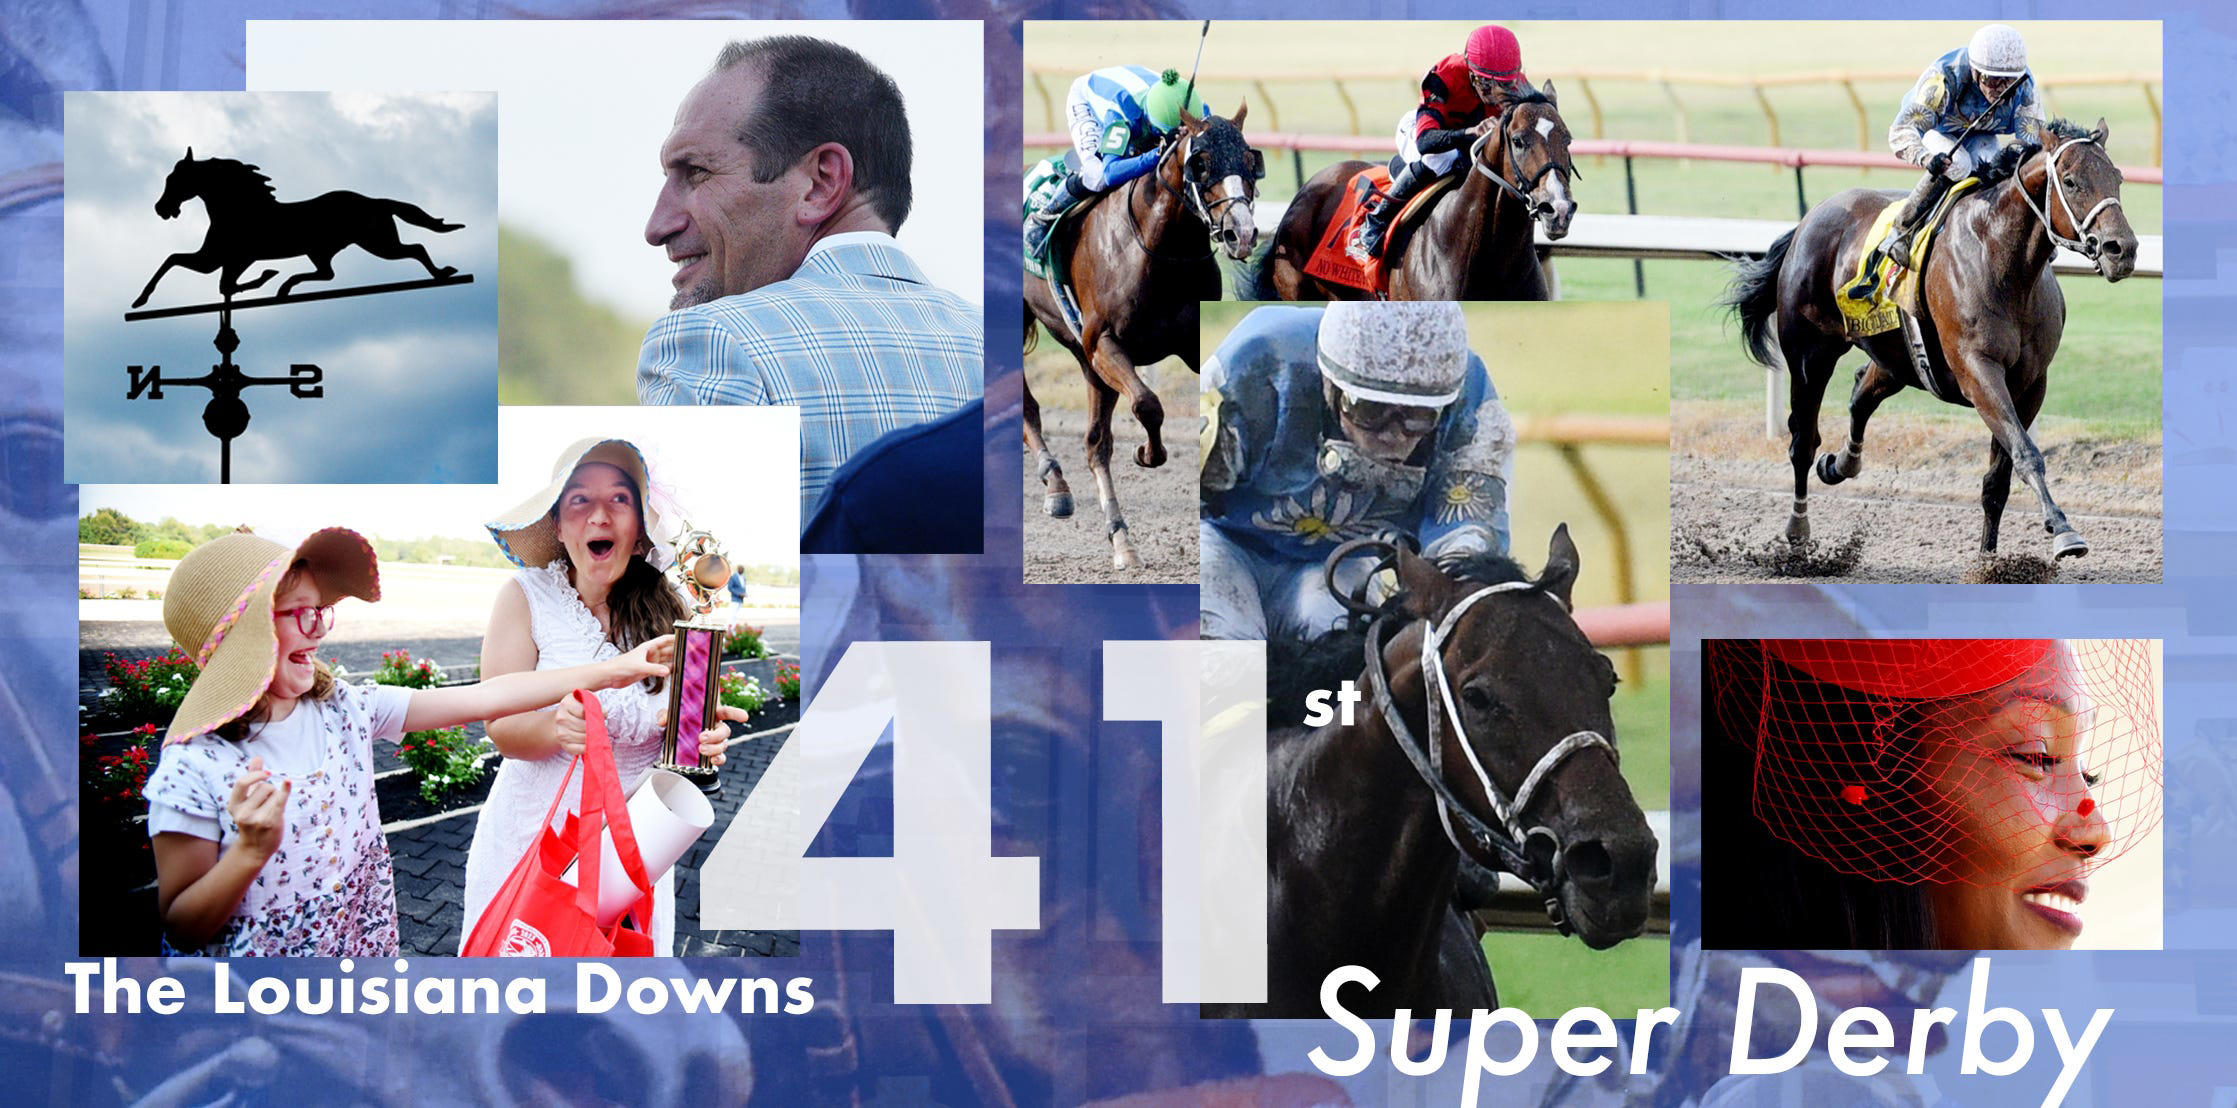 Check out all the fun at Louisiana Downs Super Derby 41